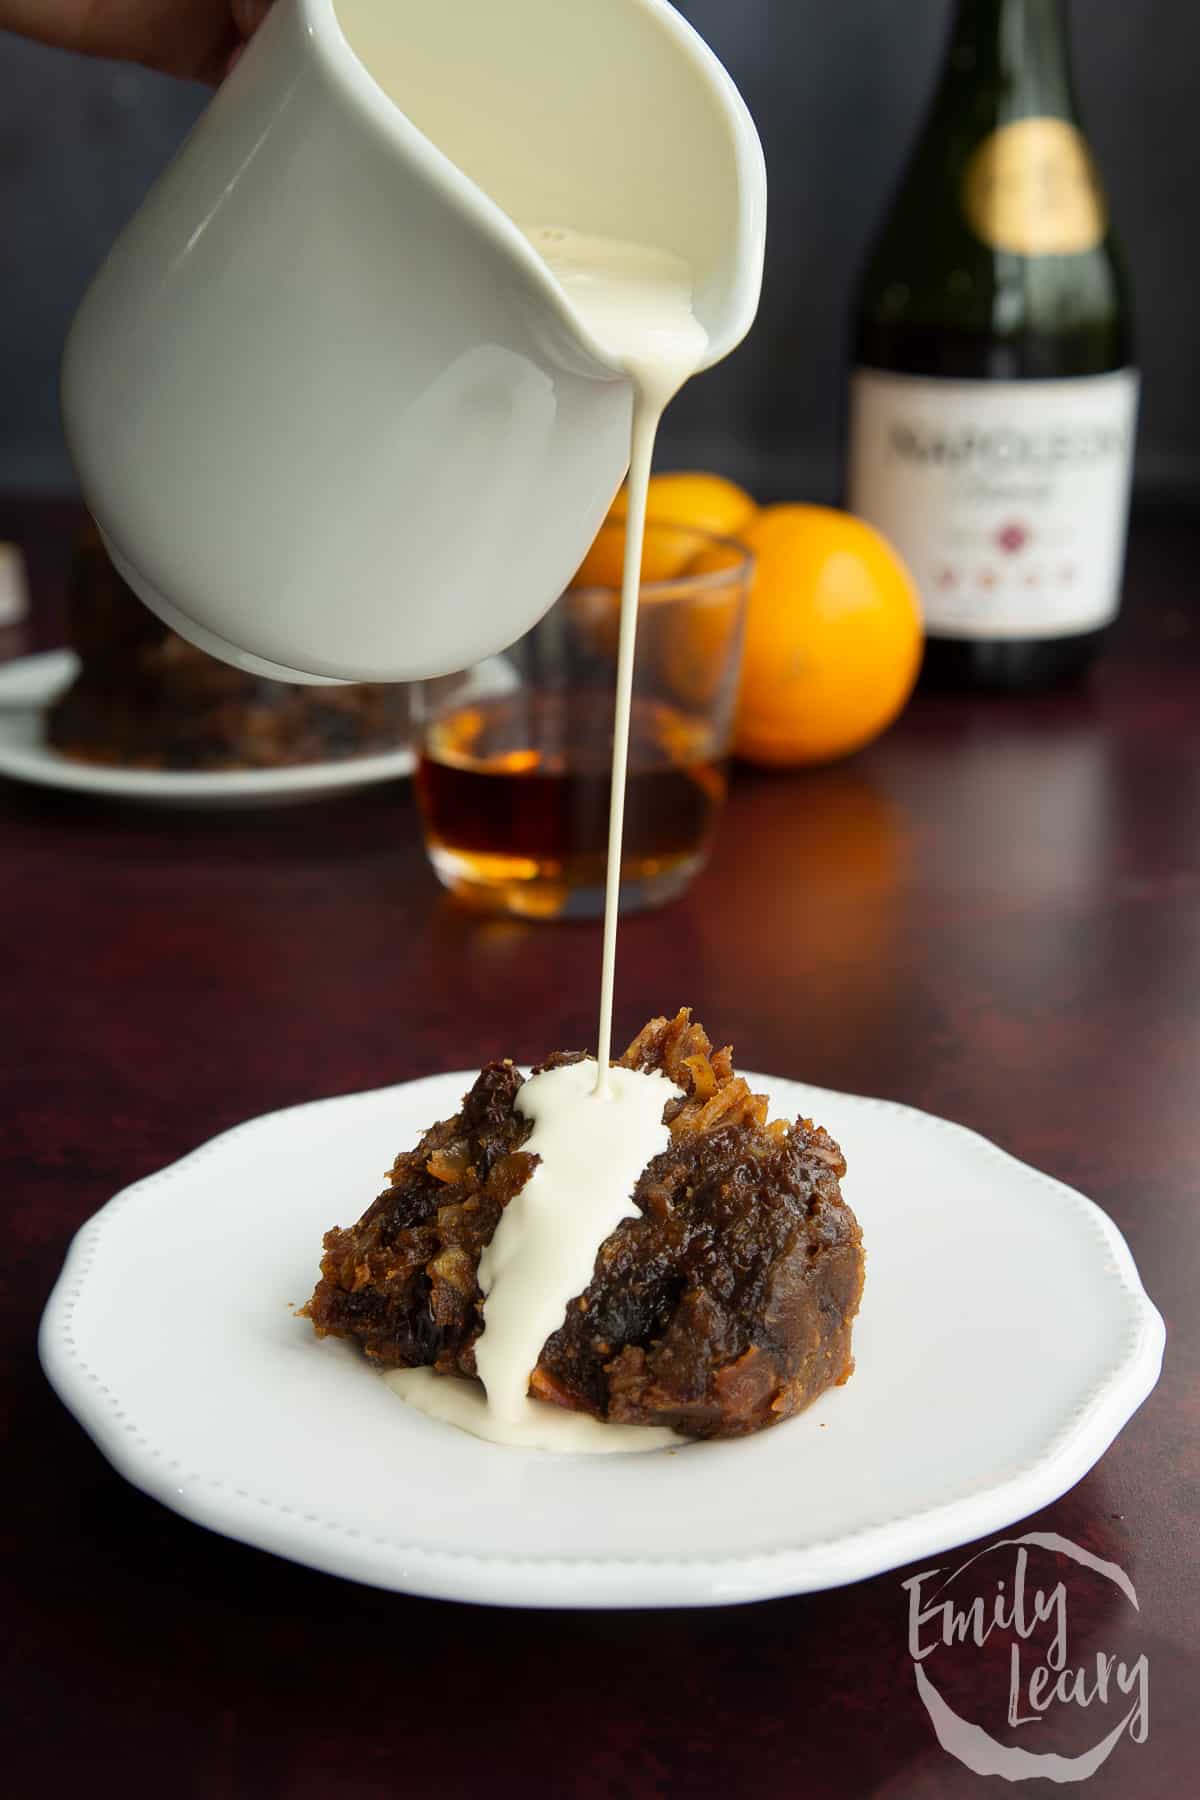 A piece of vegan Christmas pudding on a small white plate. Vegan cream is being poured on to it and running onto the plate